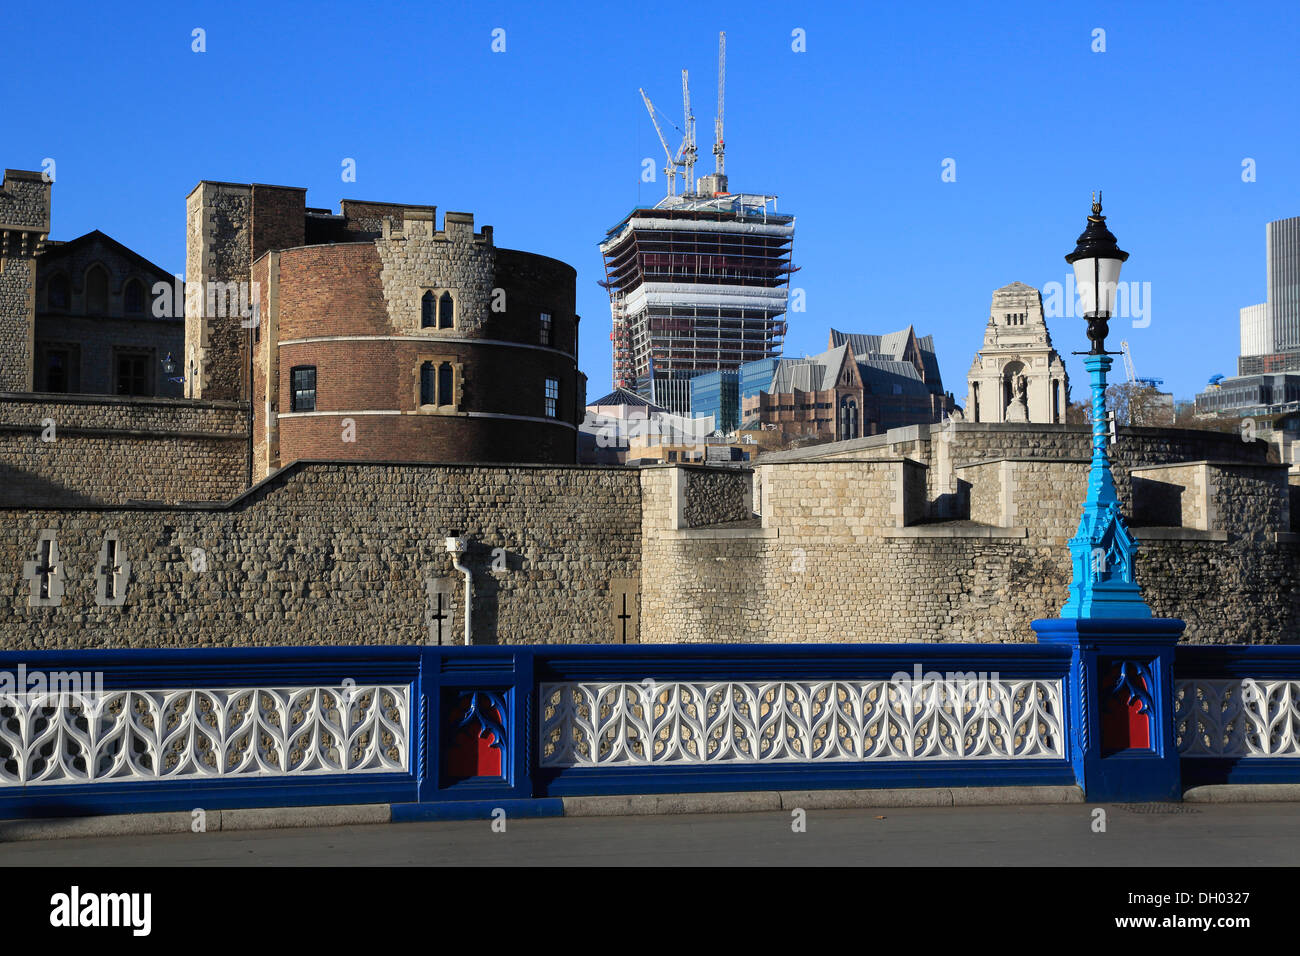 The Tower of London, seen from the approach of the Tower Bridge, looking towards the Port of London Authority Building and the Stock Photo